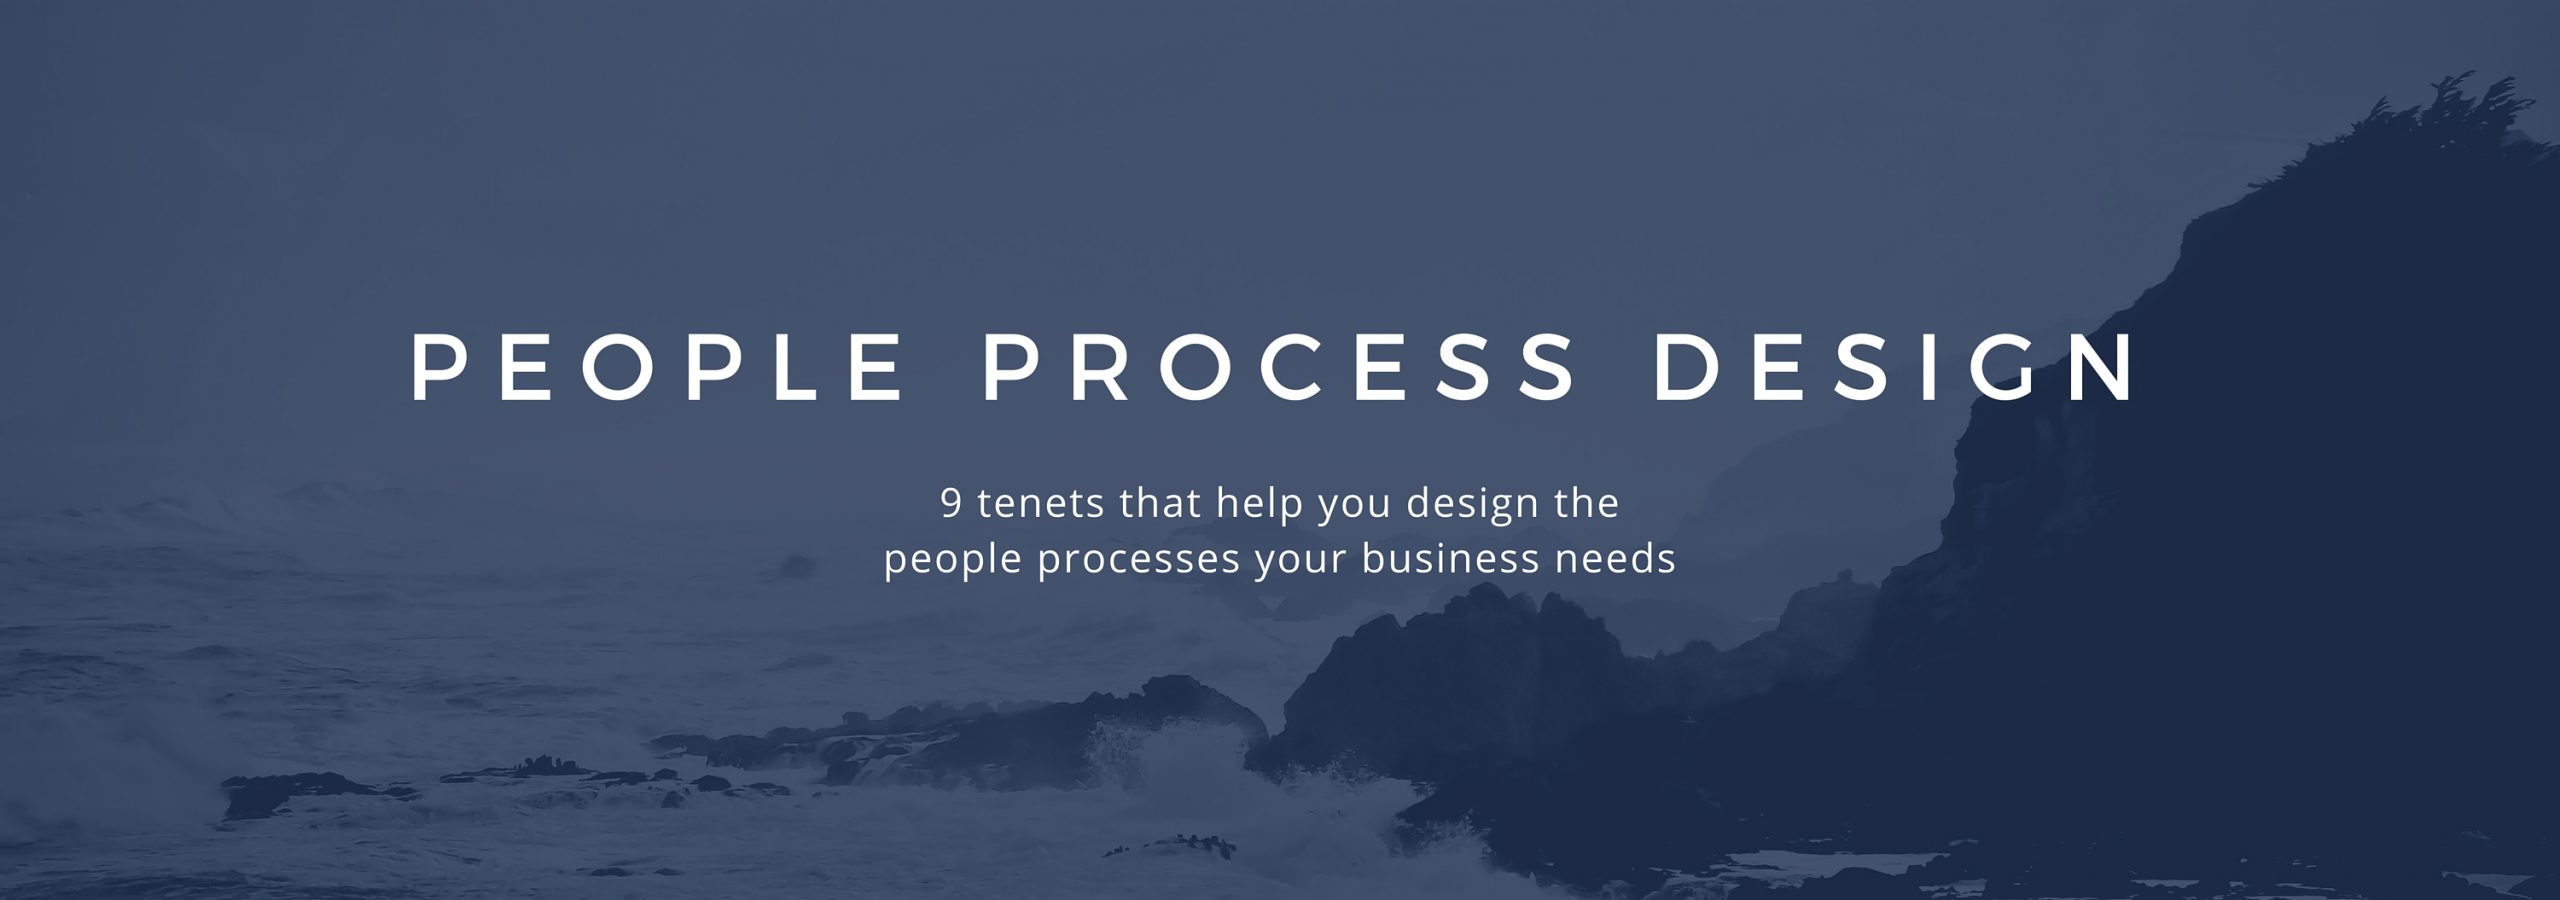 9 Tenets to design people processes